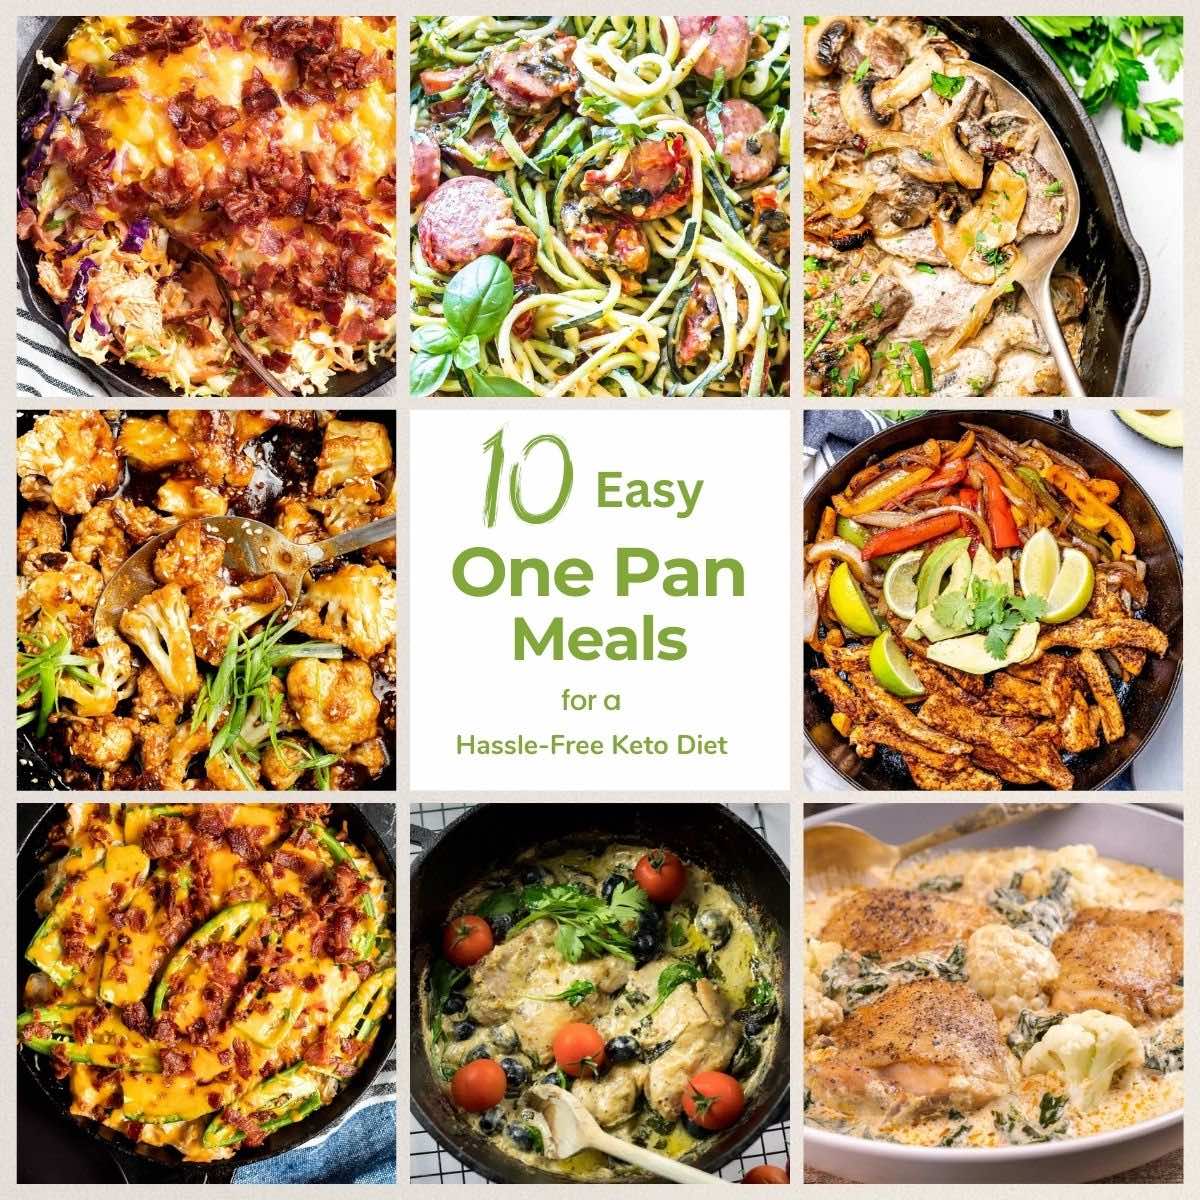 10 Easy One Pan Meals for a Hassle-Free Keto Diet